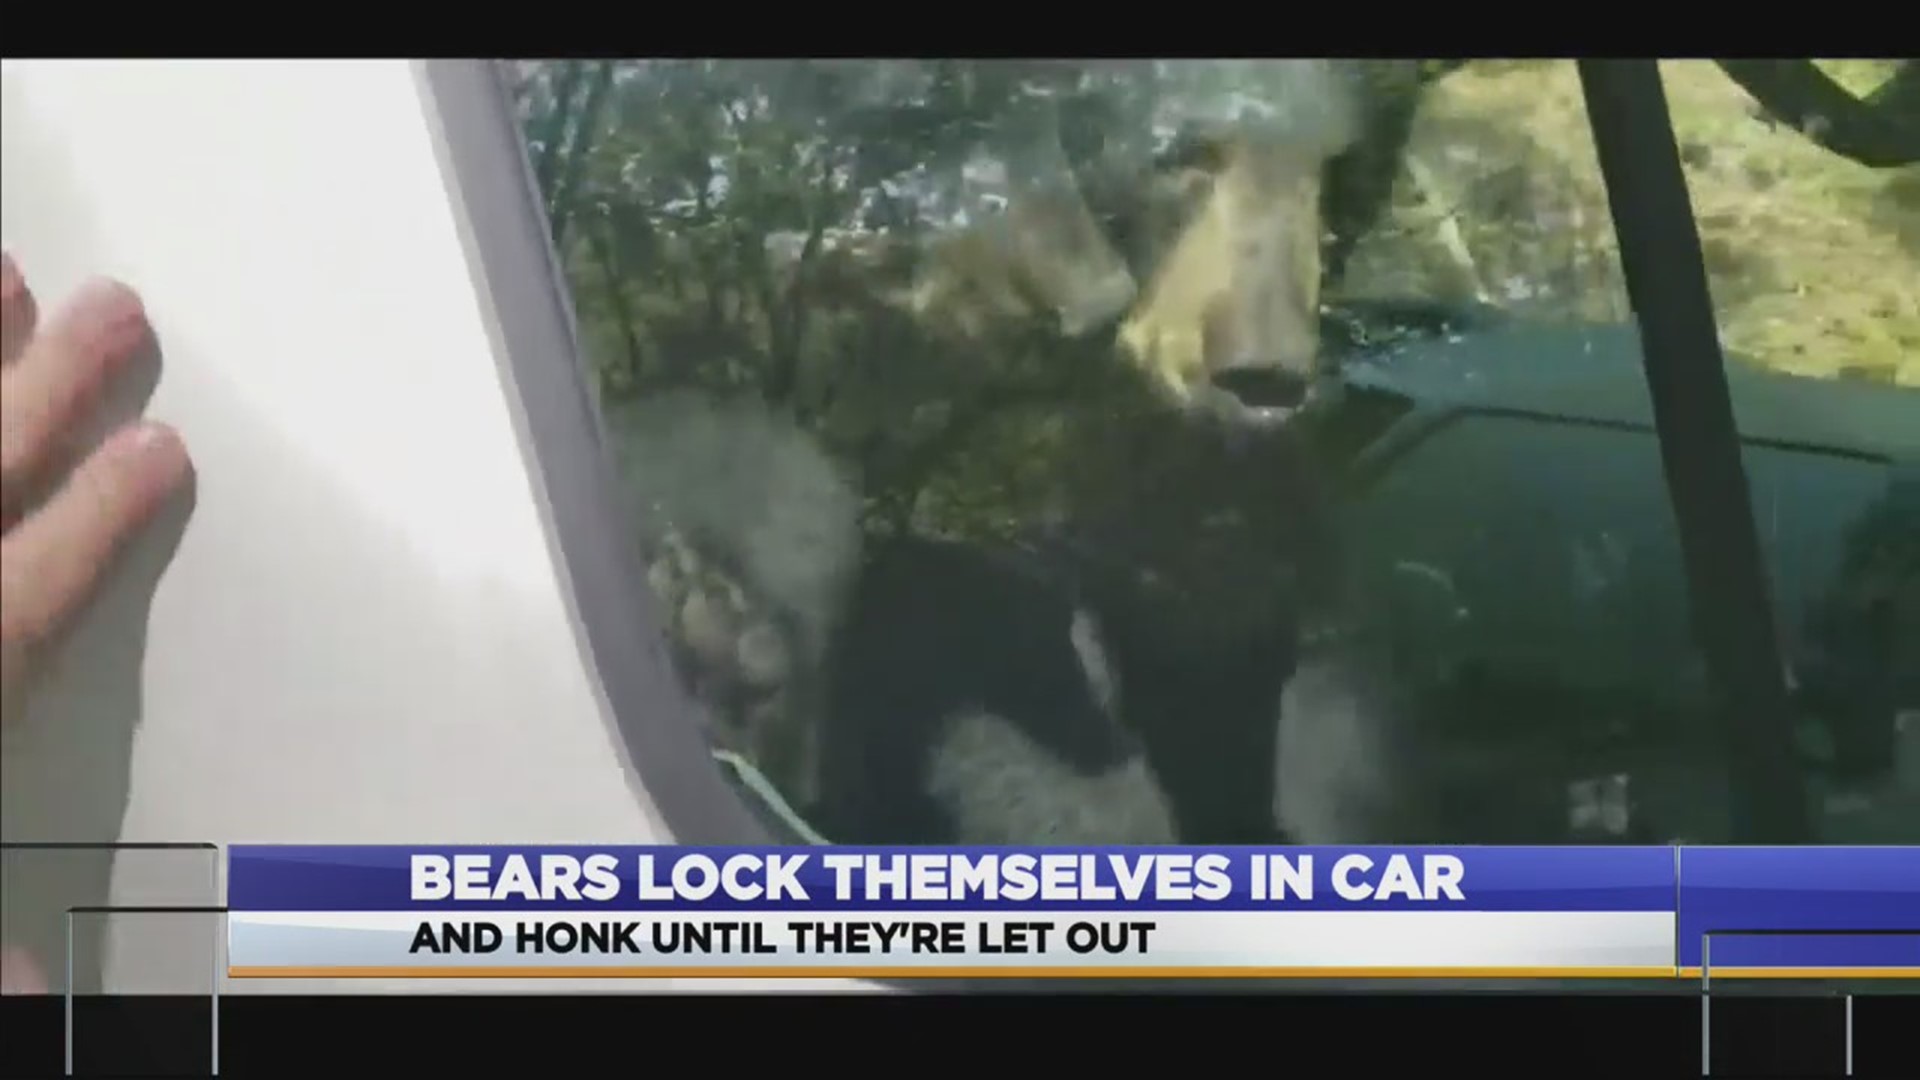 The next time you hear a car honking in Gatlinburg, just remember - there's a real-life chance that it's a bear pressing the horn.